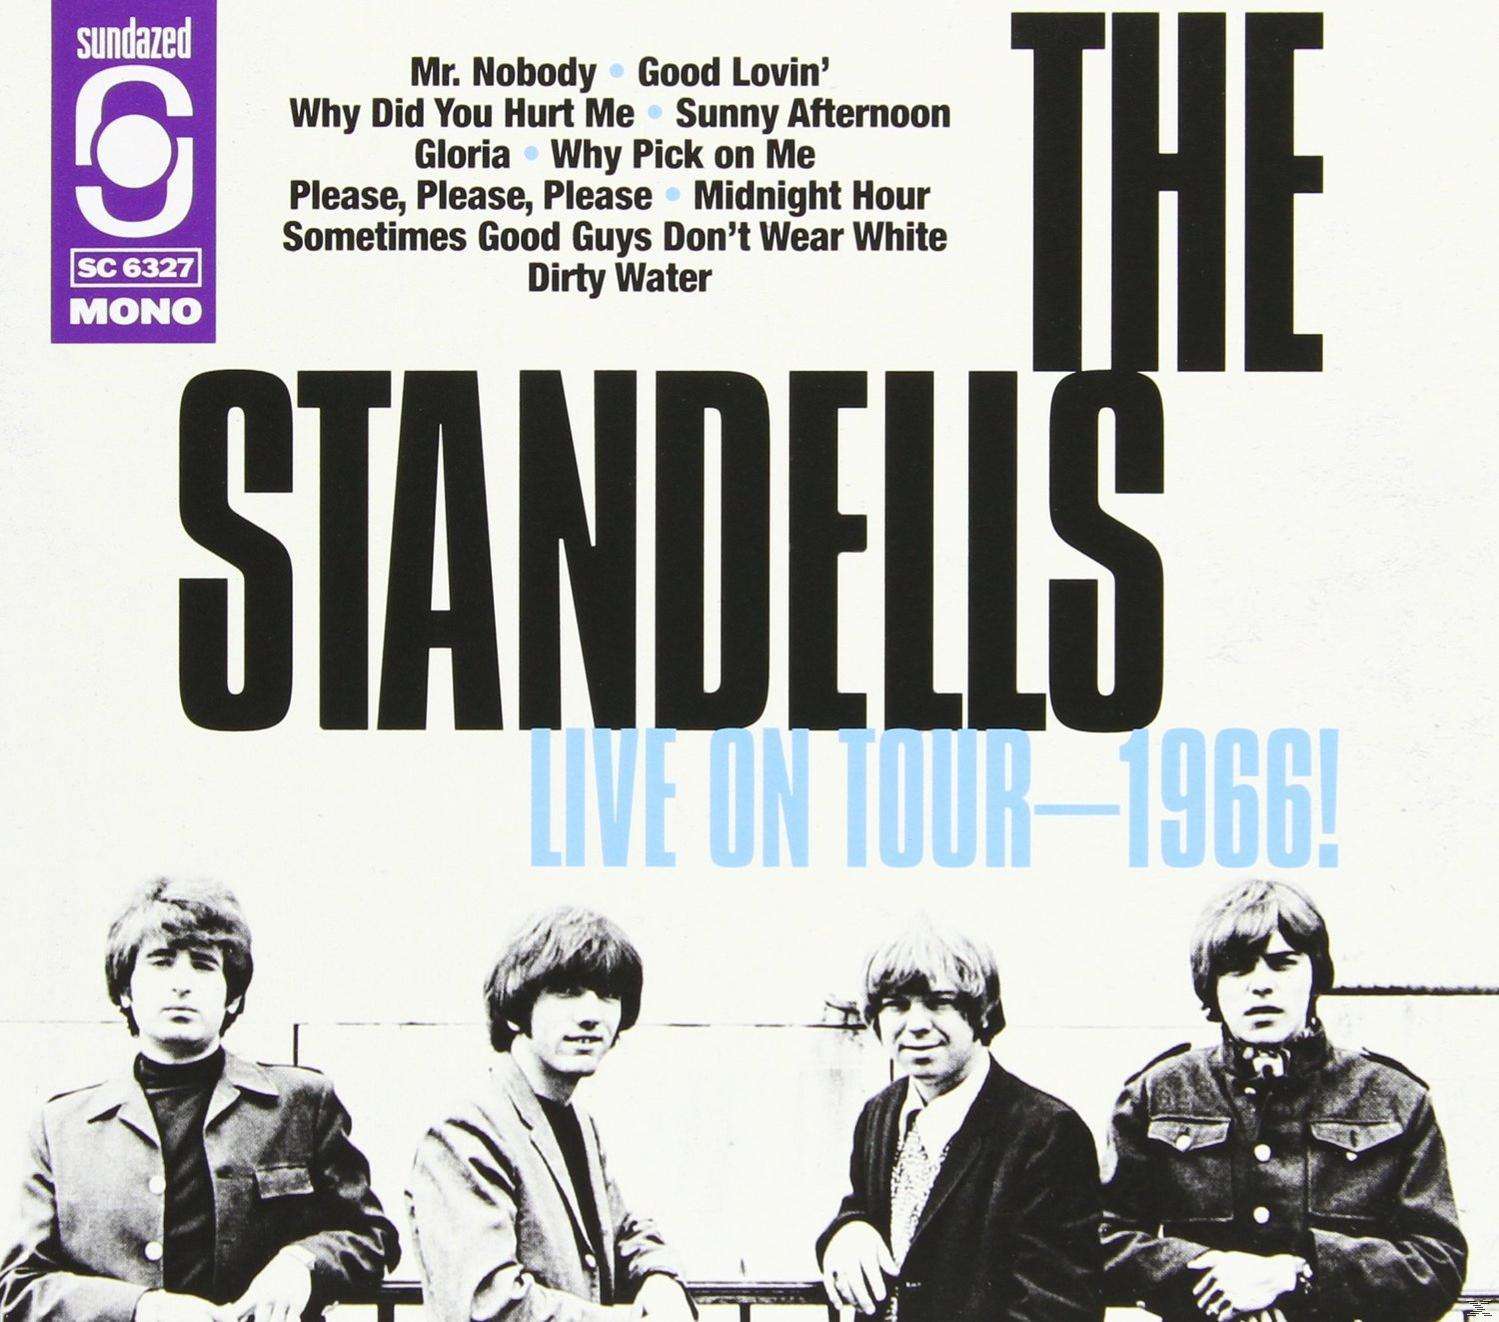 The Standells On Live - - Tour-1966! (CD)